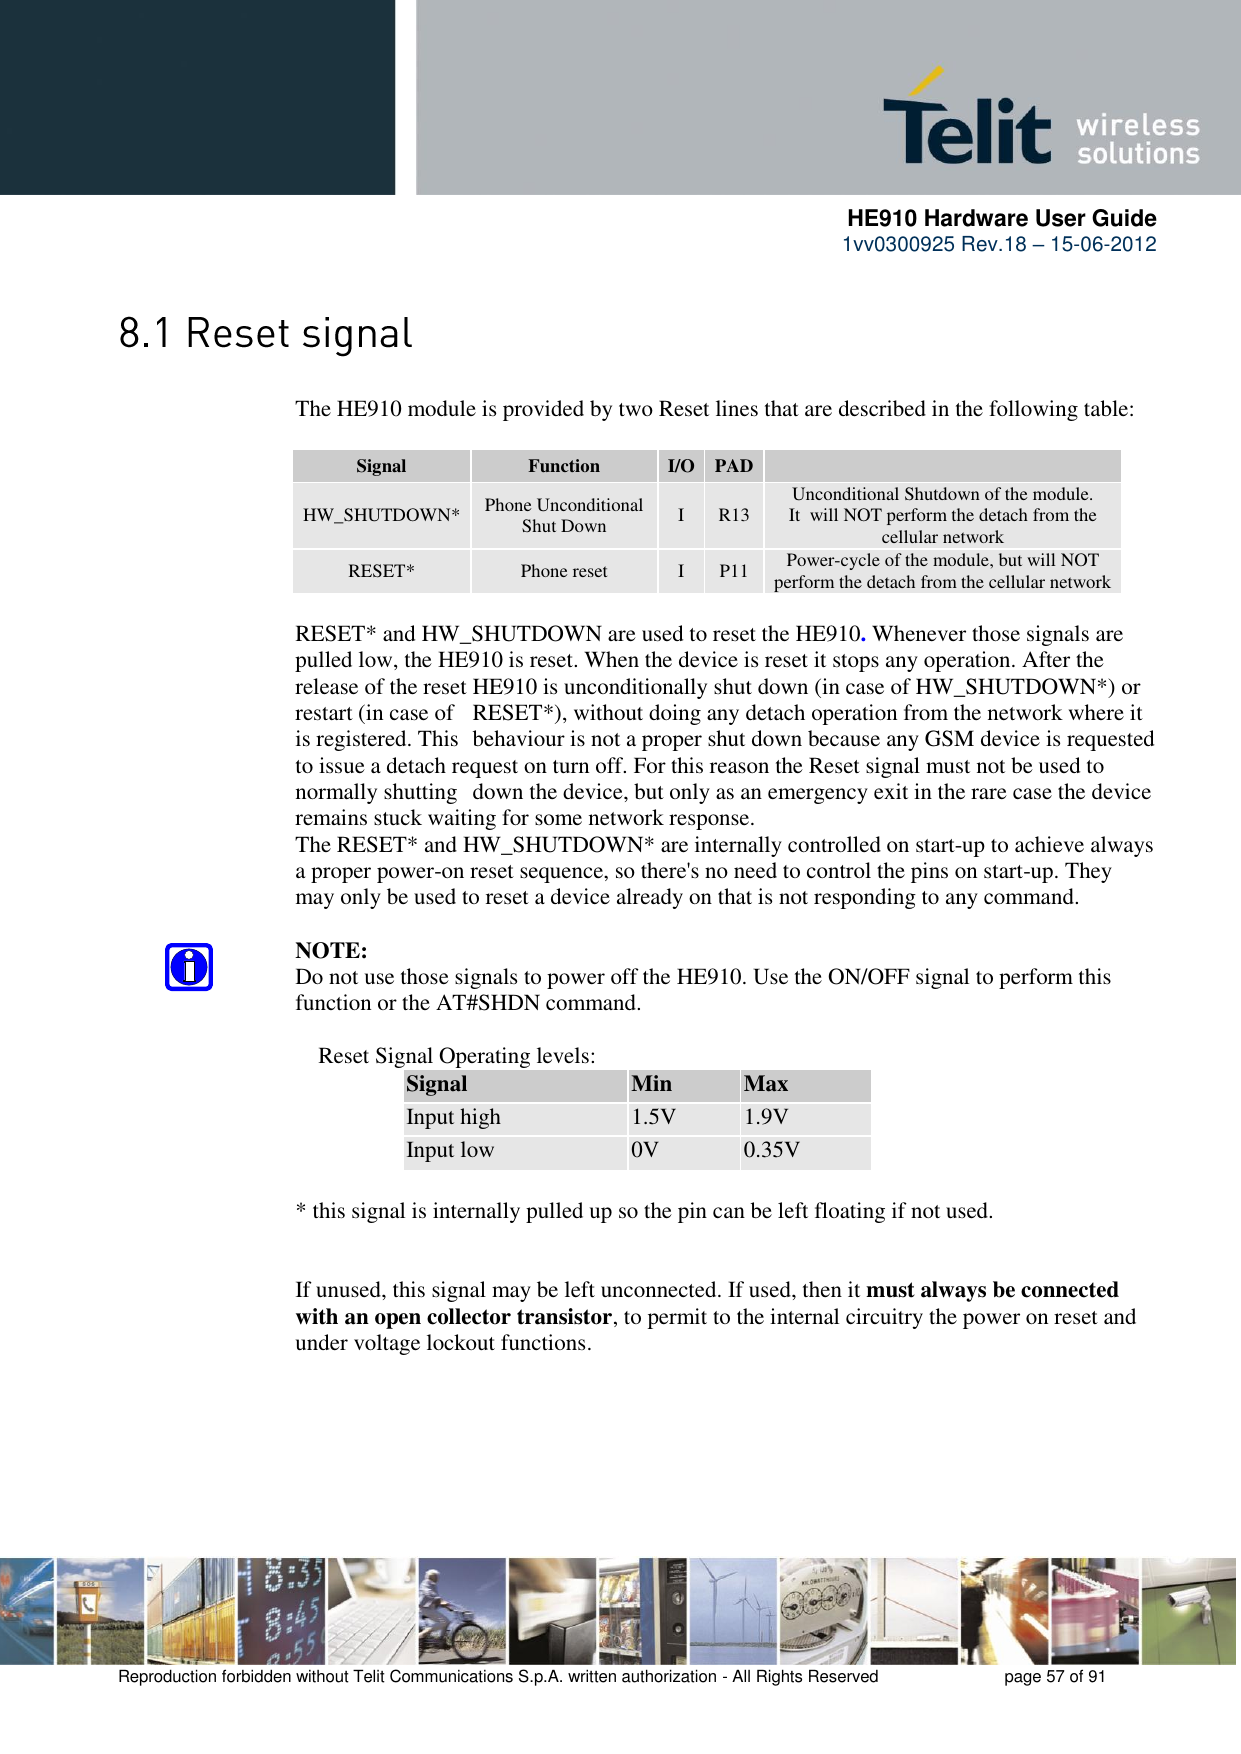      HE910 Hardware User Guide 1vv0300925 Rev.18 – 15-06-2012    Reproduction forbidden without Telit Communications S.p.A. written authorization - All Rights Reserved    page 57 of 91       The HE910 module is provided by two Reset lines that are described in the following table:  Signal Function I/O PAD  HW_SHUTDOWN* Phone Unconditional Shut Down I R13 Unconditional Shutdown of the module. It  will NOT perform the detach from the cellular network RESET* Phone reset I P11 Power-cycle of the module, but will NOT perform the detach from the cellular network      RESET* and HW_SHUTDOWN are used to reset the HE910. Whenever those signals are     pulled low, the HE910 is reset. When the device is reset it stops any operation. After the     release of the reset HE910 is unconditionally shut down (in case of HW_SHUTDOWN*) or     restart (in case of   RESET*), without doing any detach operation from the network where it     is registered. This  behaviour is not a proper shut down because any GSM device is requested     to issue a detach request on turn off. For this reason the Reset signal must not be used to     normally shutting  down the device, but only as an emergency exit in the rare case the device     remains stuck waiting for some network response.     The RESET* and HW_SHUTDOWN* are internally controlled on start-up to achieve always     a proper power-on reset sequence, so there&apos;s no need to control the pins on start-up. They     may only be used to reset a device already on that is not responding to any command.      NOTE:     Do not use those signals to power off the HE910. Use the ON/OFF signal to perform this     function or the AT#SHDN command.          Reset Signal Operating levels: Signal Min Max Input high 1.5V 1.9V Input low 0V 0.35V      * this signal is internally pulled up so the pin can be left floating if not used.       If unused, this signal may be left unconnected. If used, then it must always be connected     with an open collector transistor, to permit to the internal circuitry the power on reset and     under voltage lockout functions.